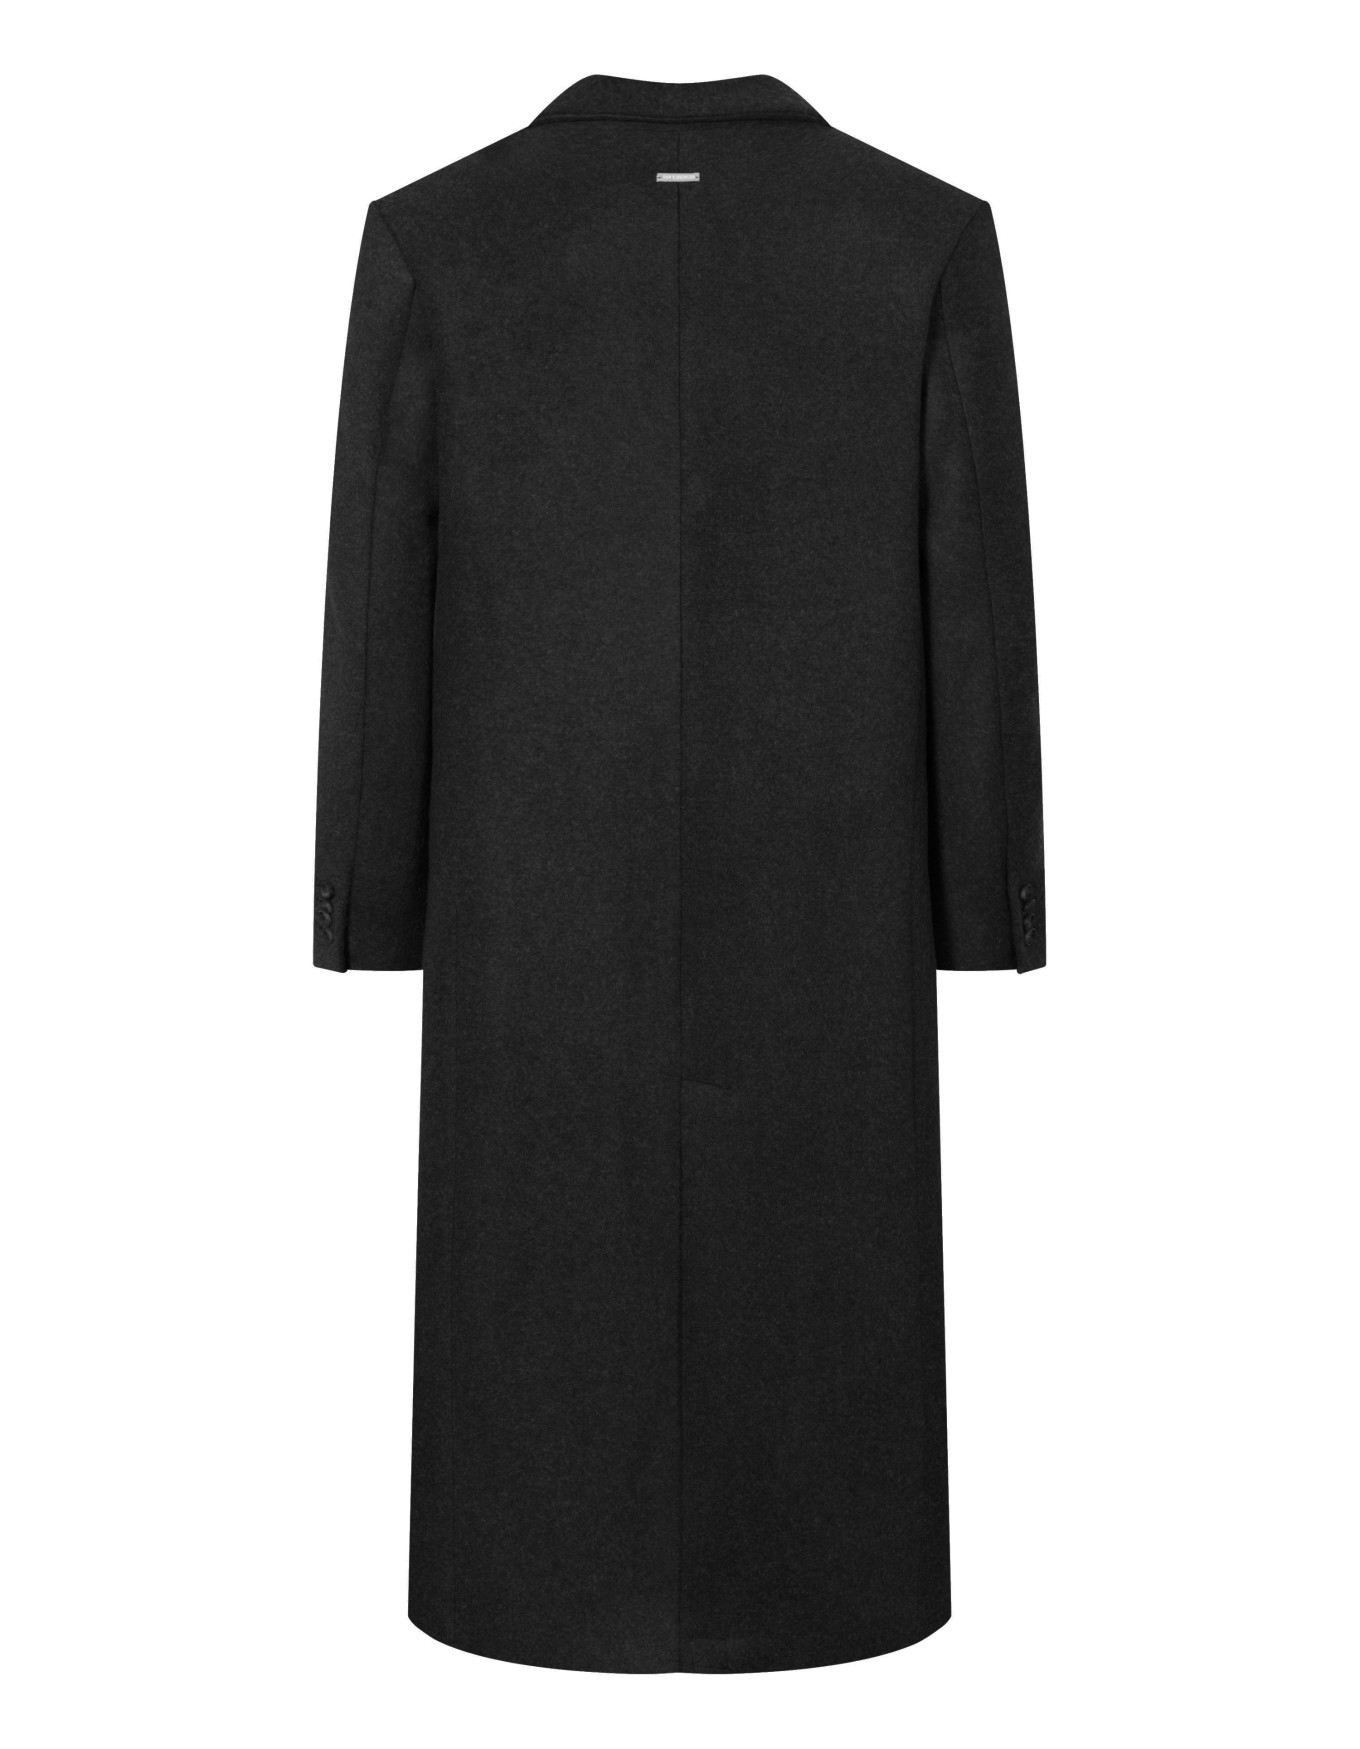 Wool Boxy Double Breasted Coat, Black image number 7